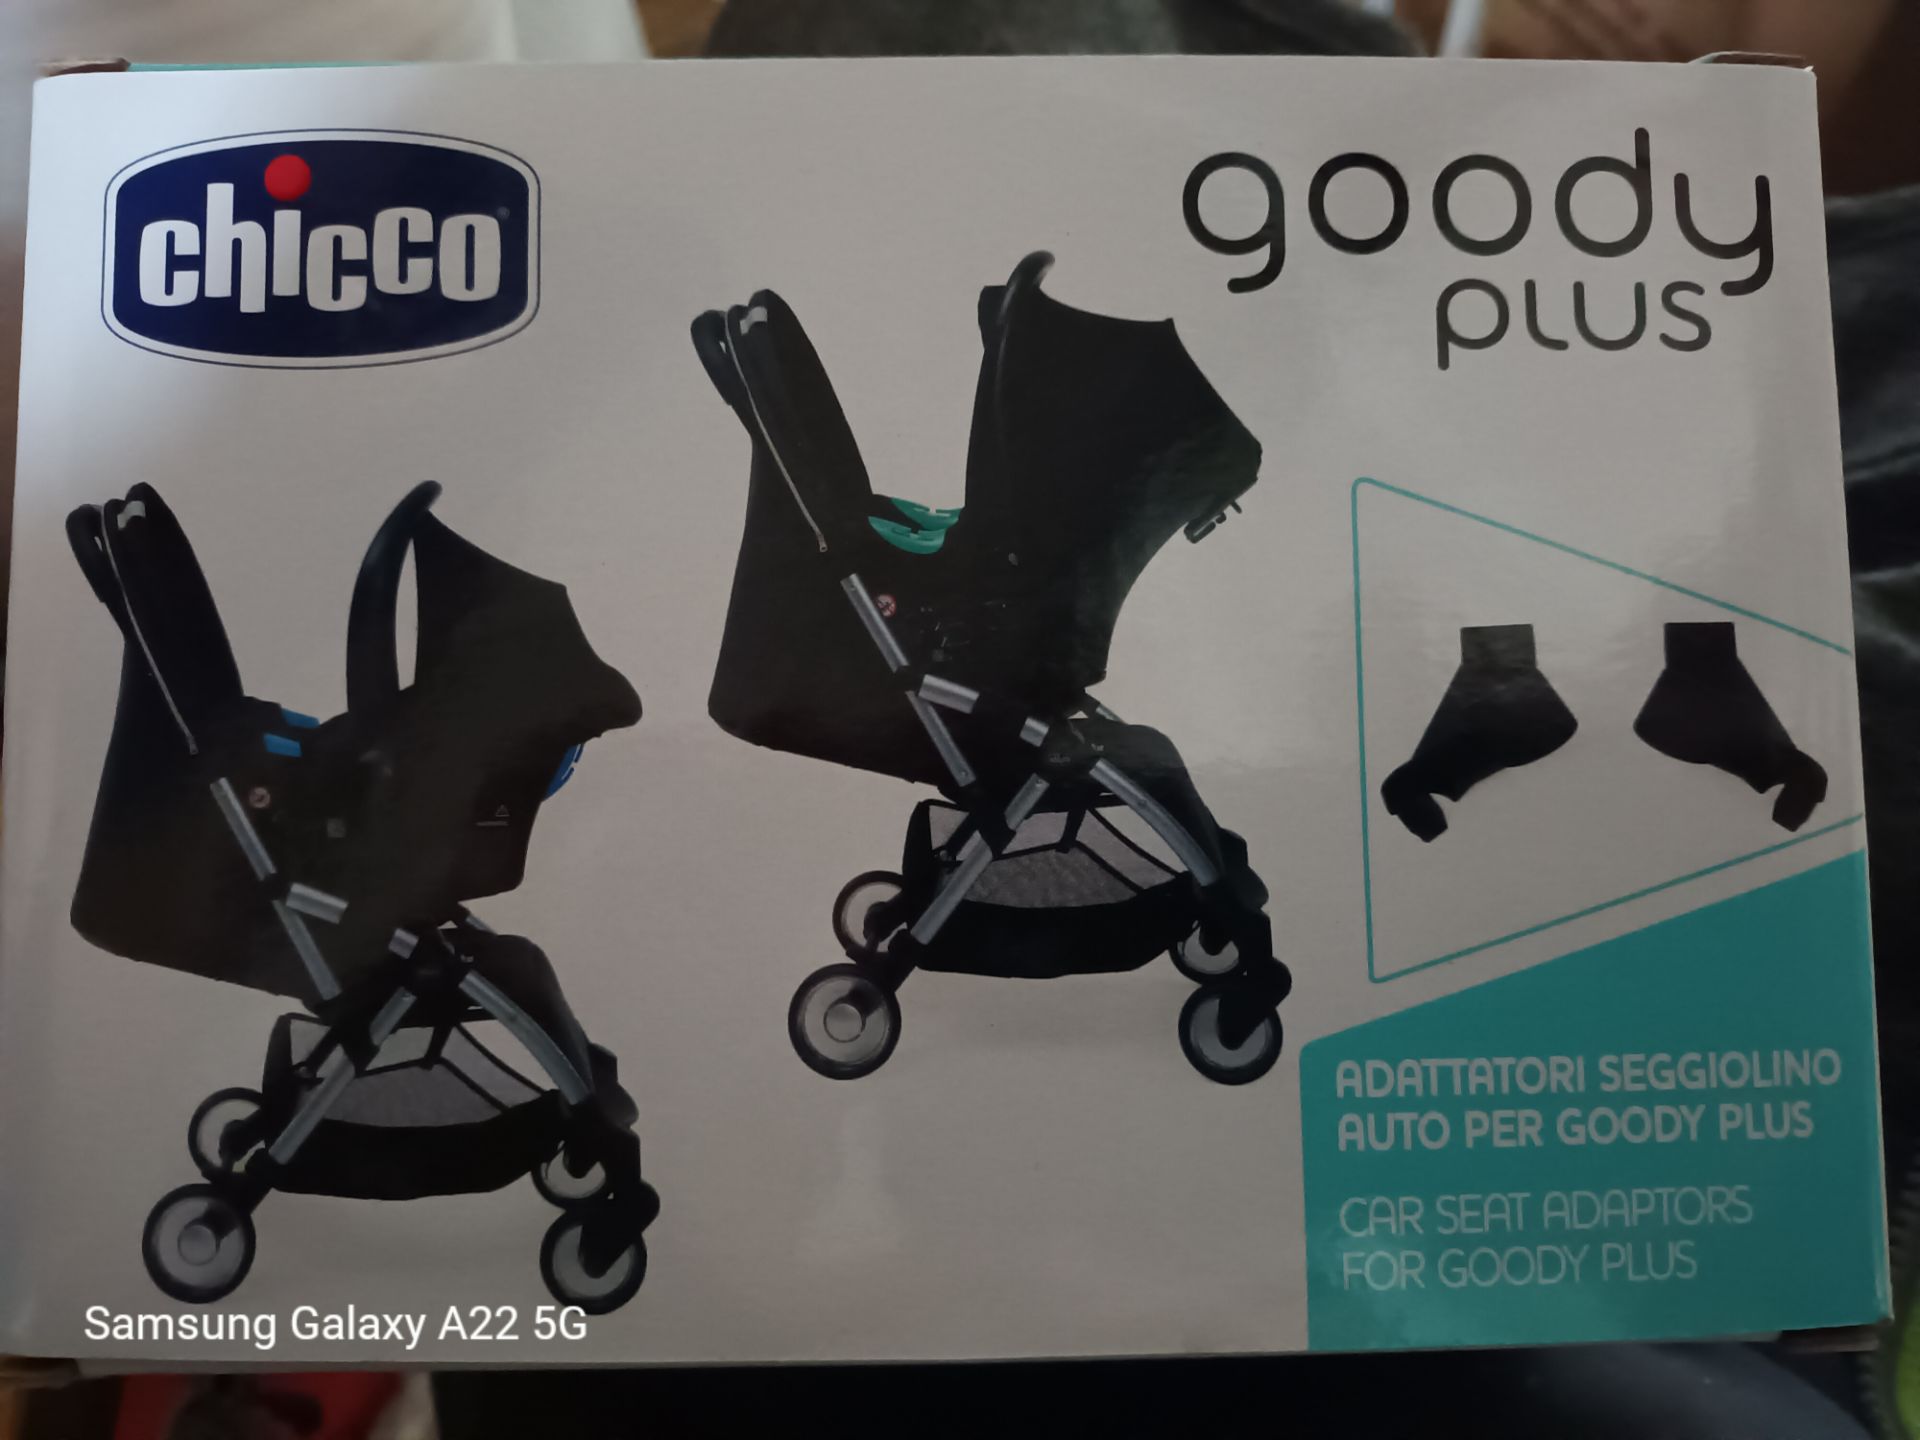 208 X CHICCO GOODY PLUS CAR SEAT ADAPTER